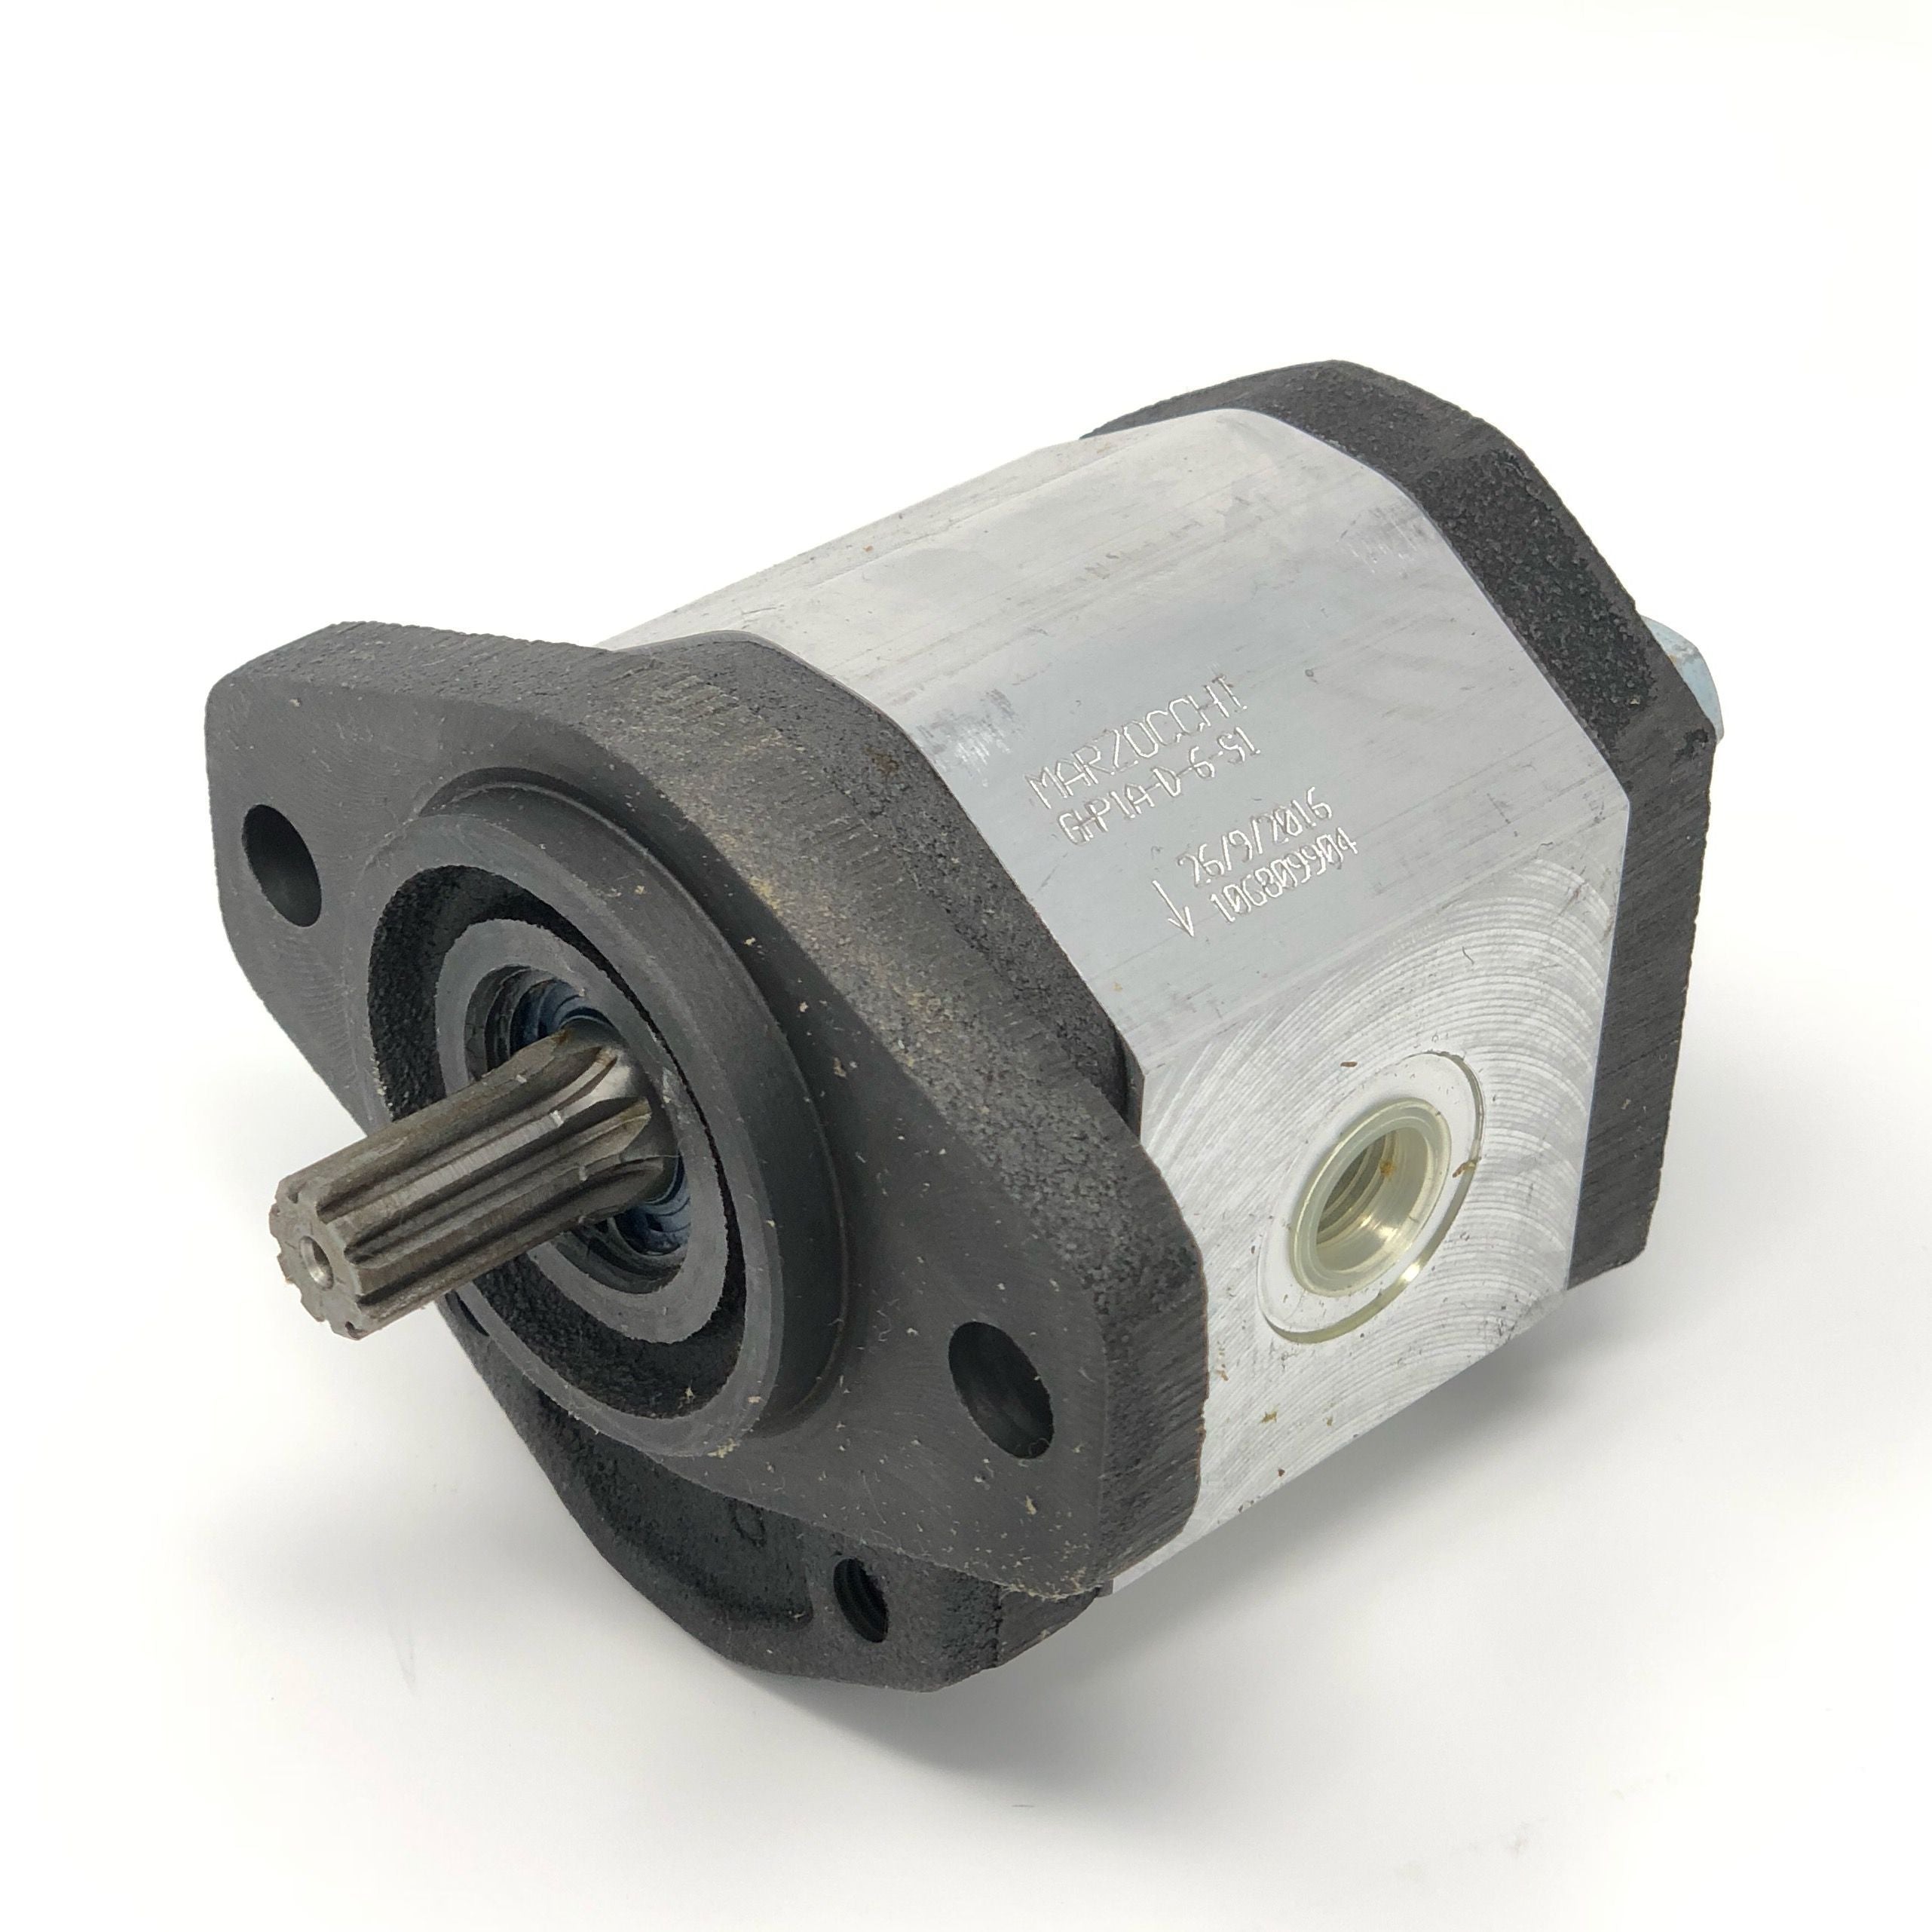 GHP1A-D-9-S1 : Marzocchi Gear Pump, CW, 6.2cc (0.3782in3), 2.95 GPM, 3770psi, 3000 RPM, #8 SAE (1/2") In, #6 SAE (3/8") Out, Splined Shaft 9T 20/40DP, SAE AA 2-Bolt Mount